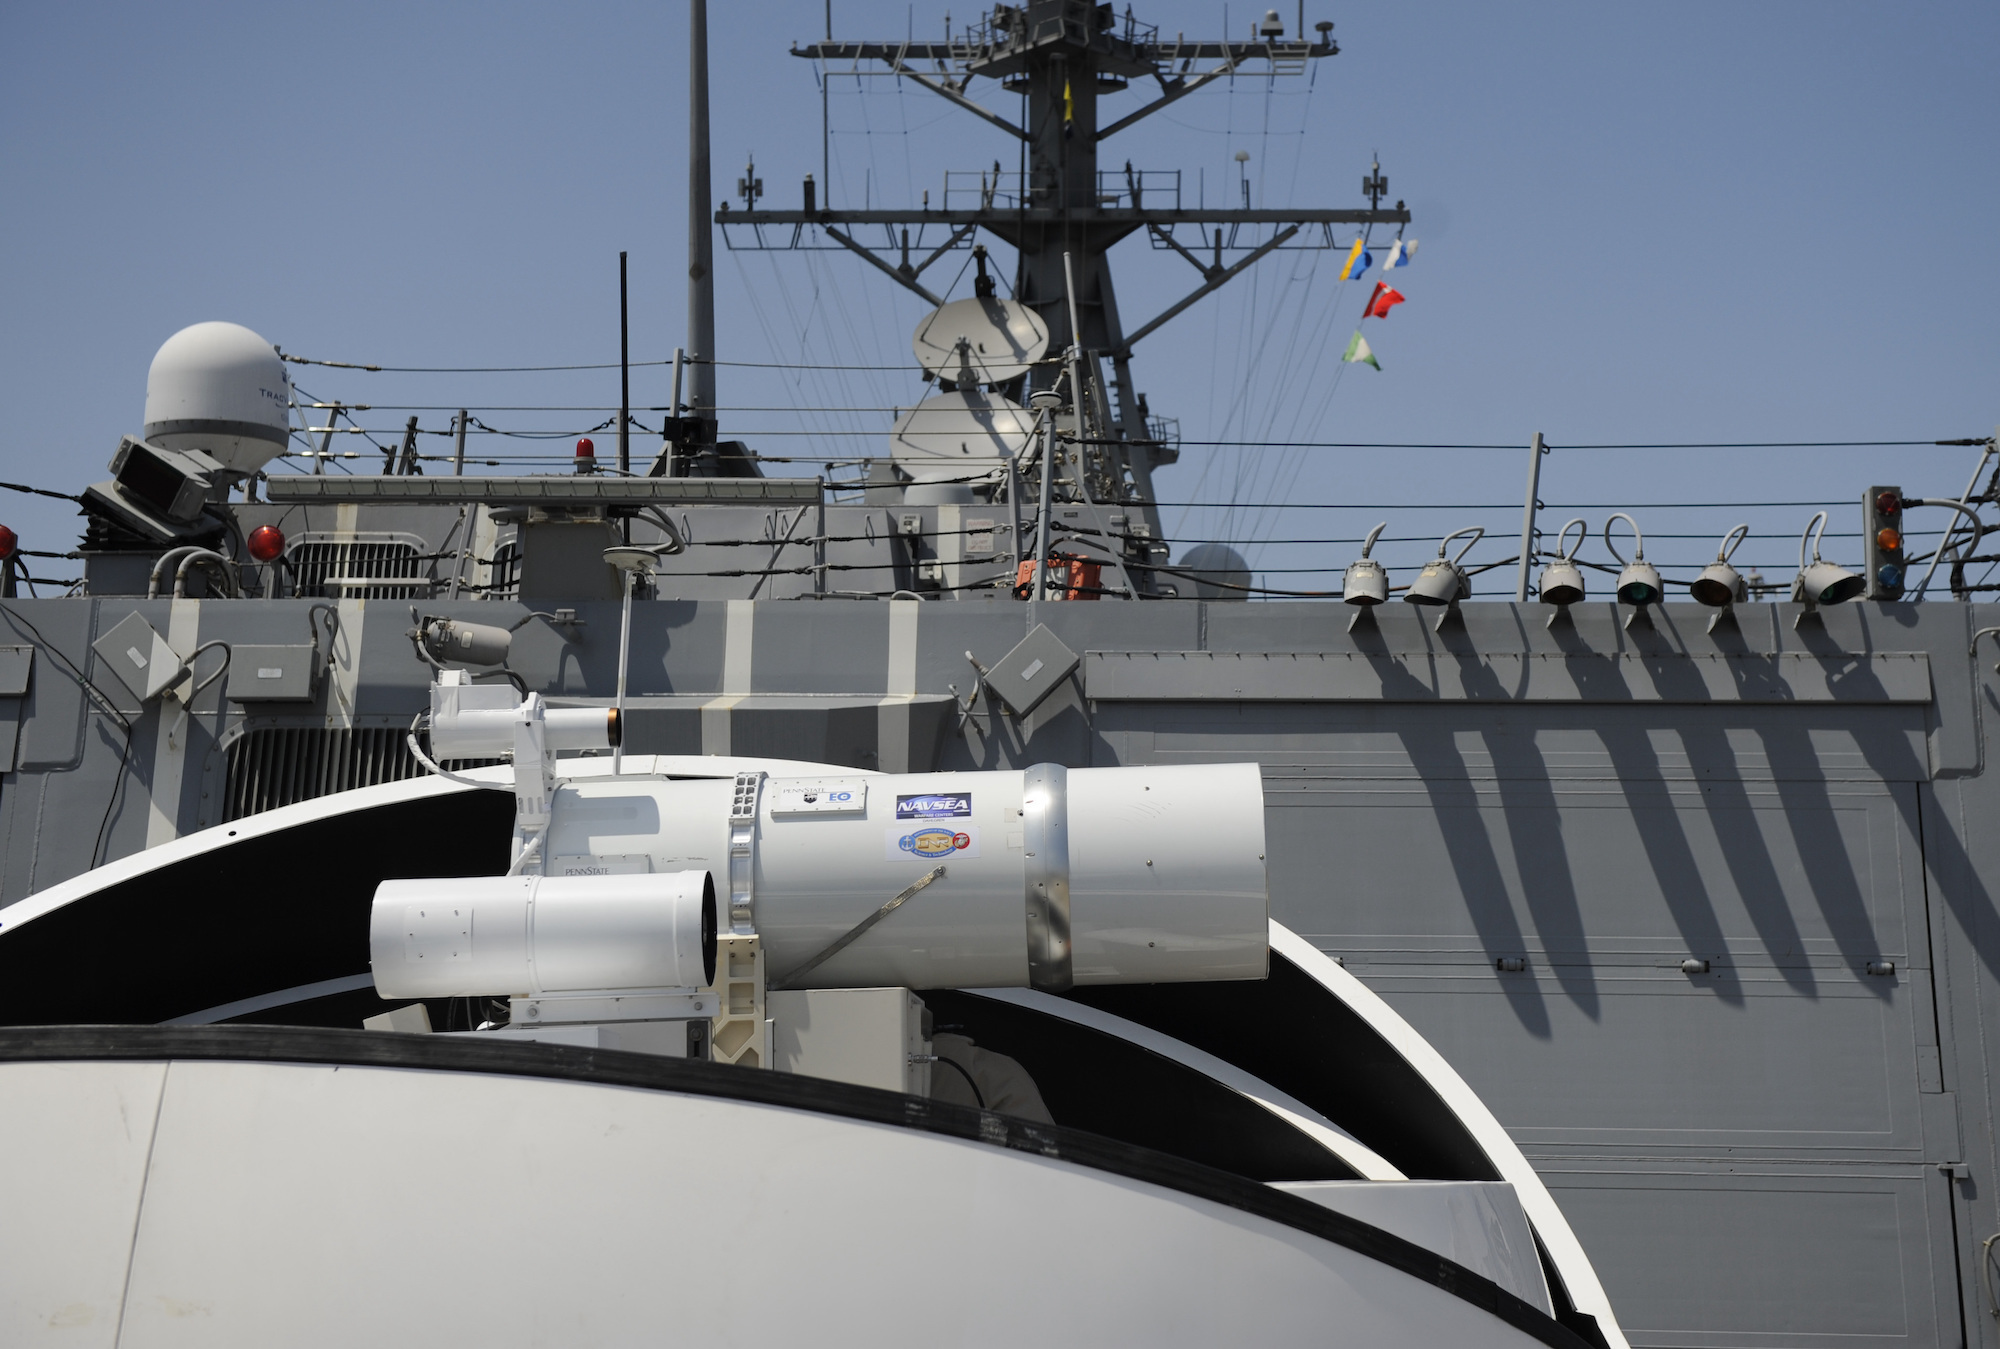 A Laser Weapon System on a Naval ship in 2012.